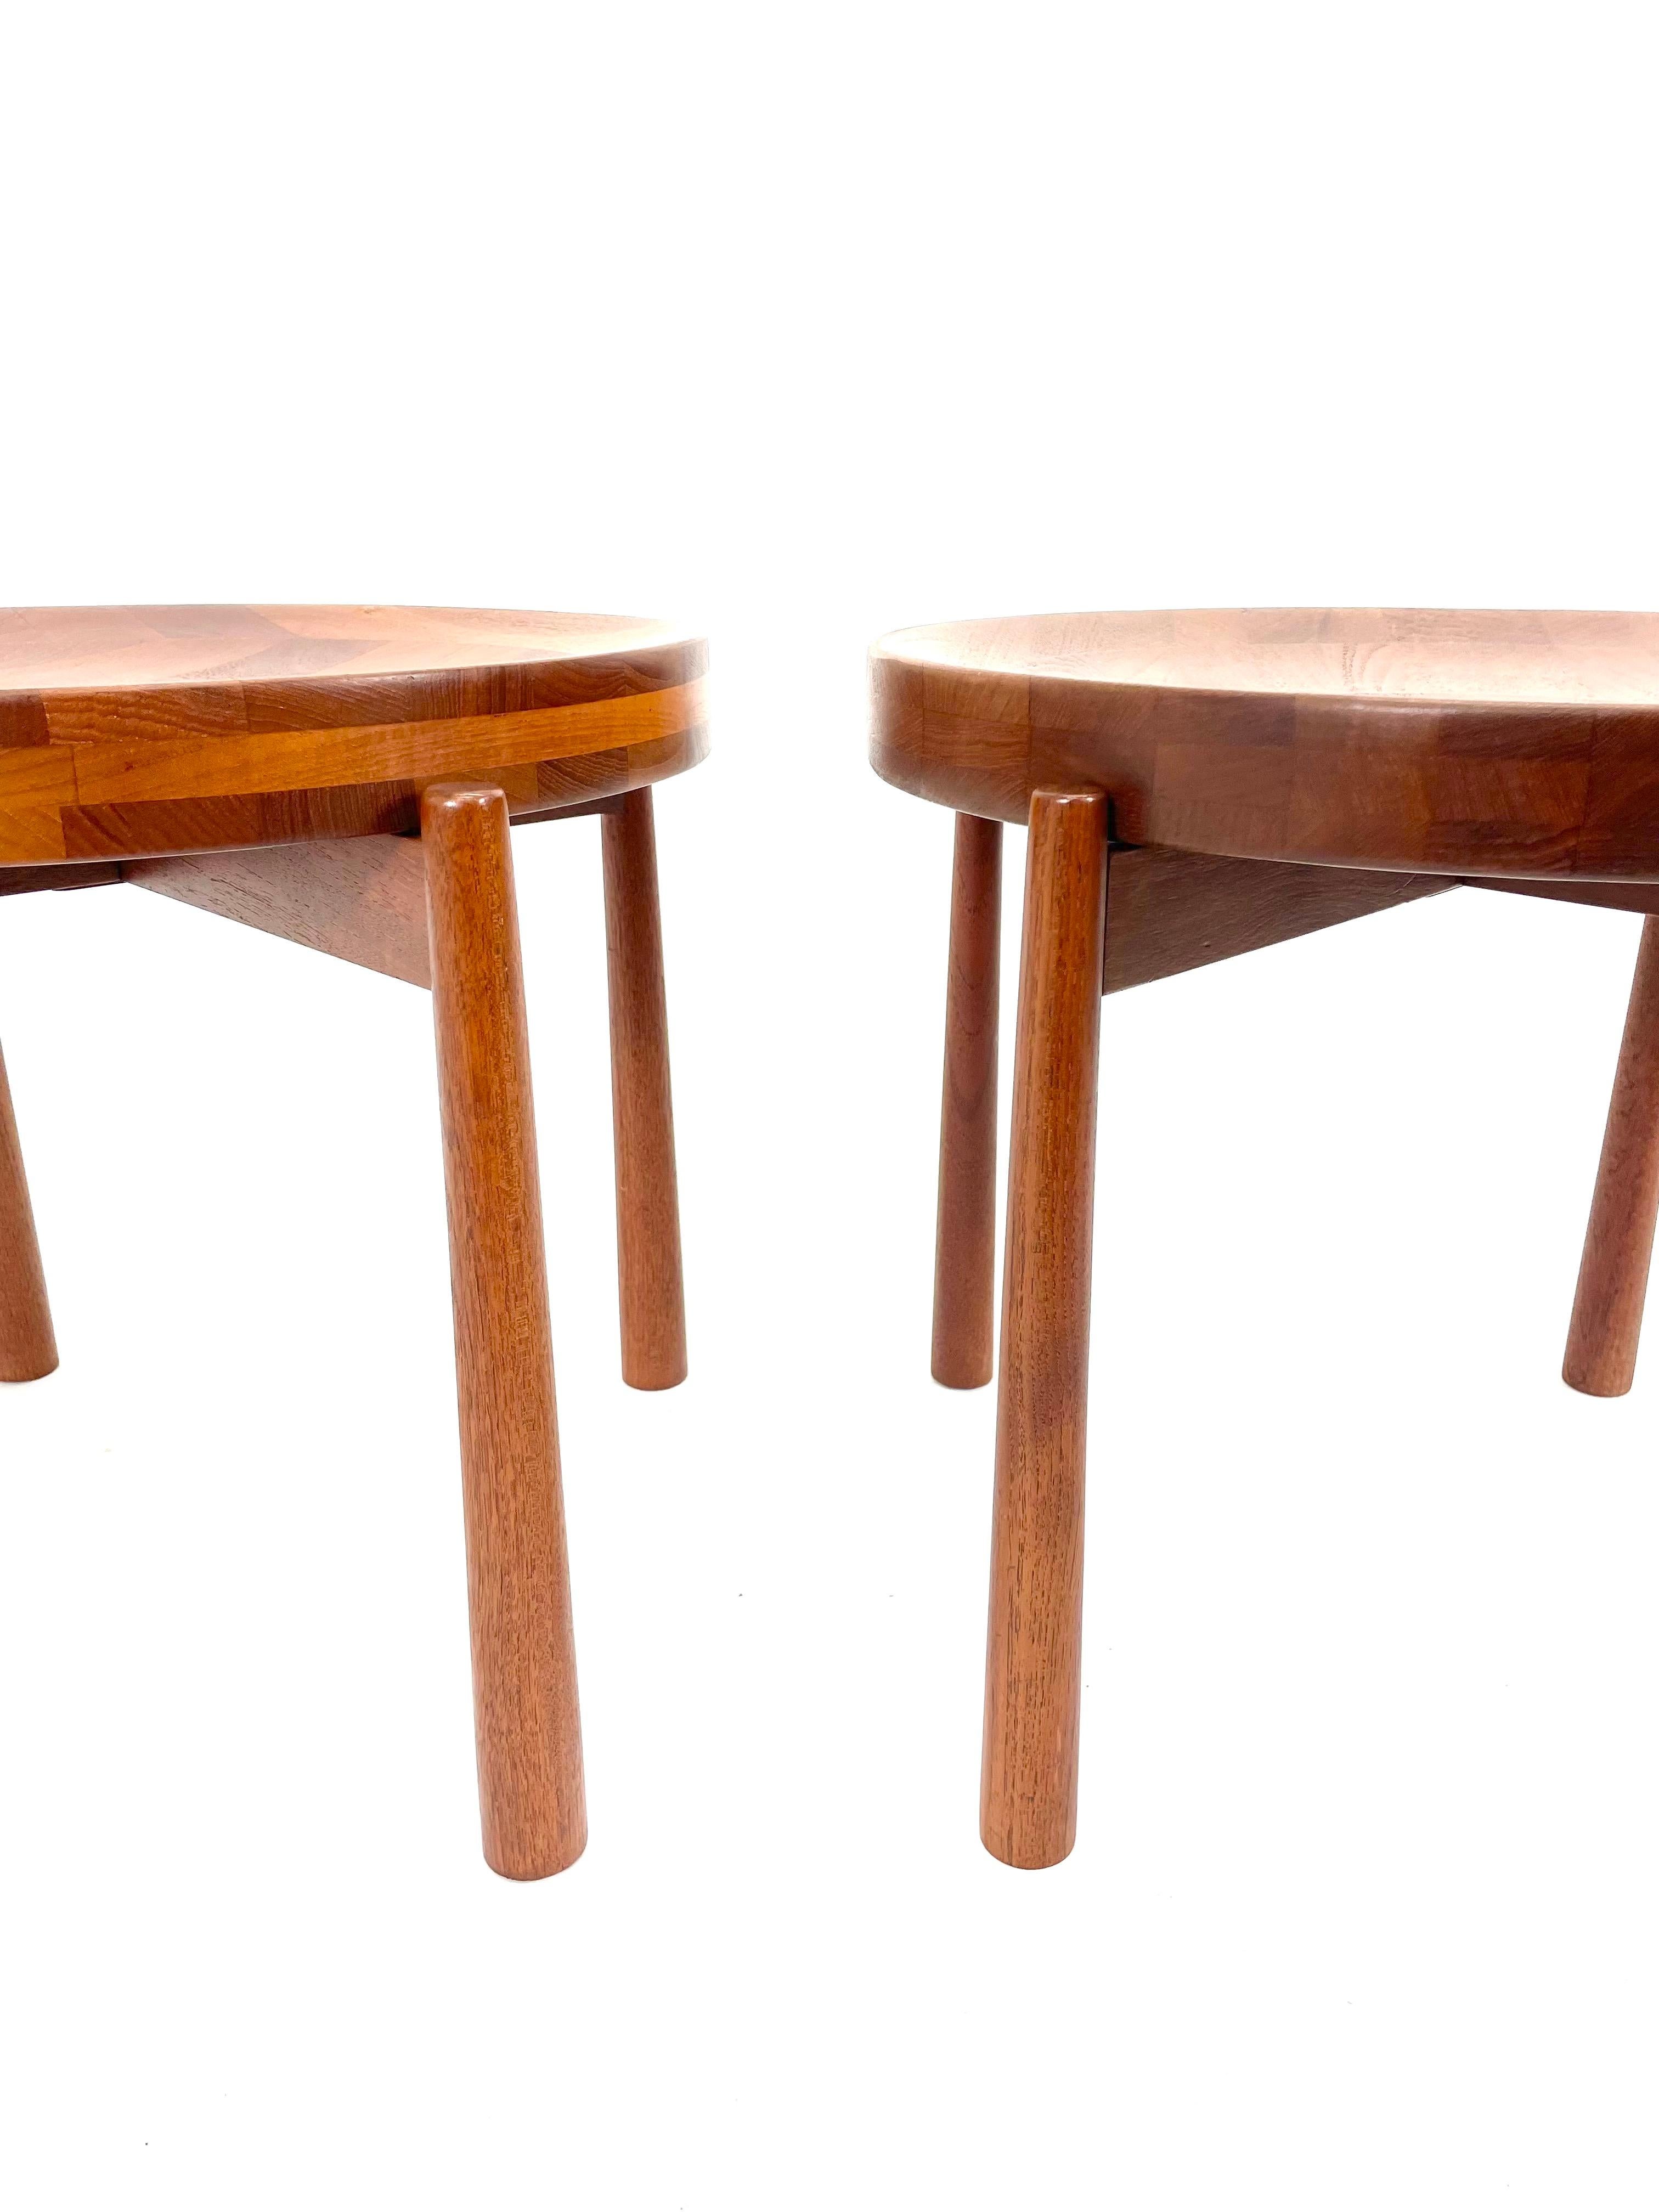 Teak Jens Quistgaard Side Table for DUX of Sweden (Two Available)